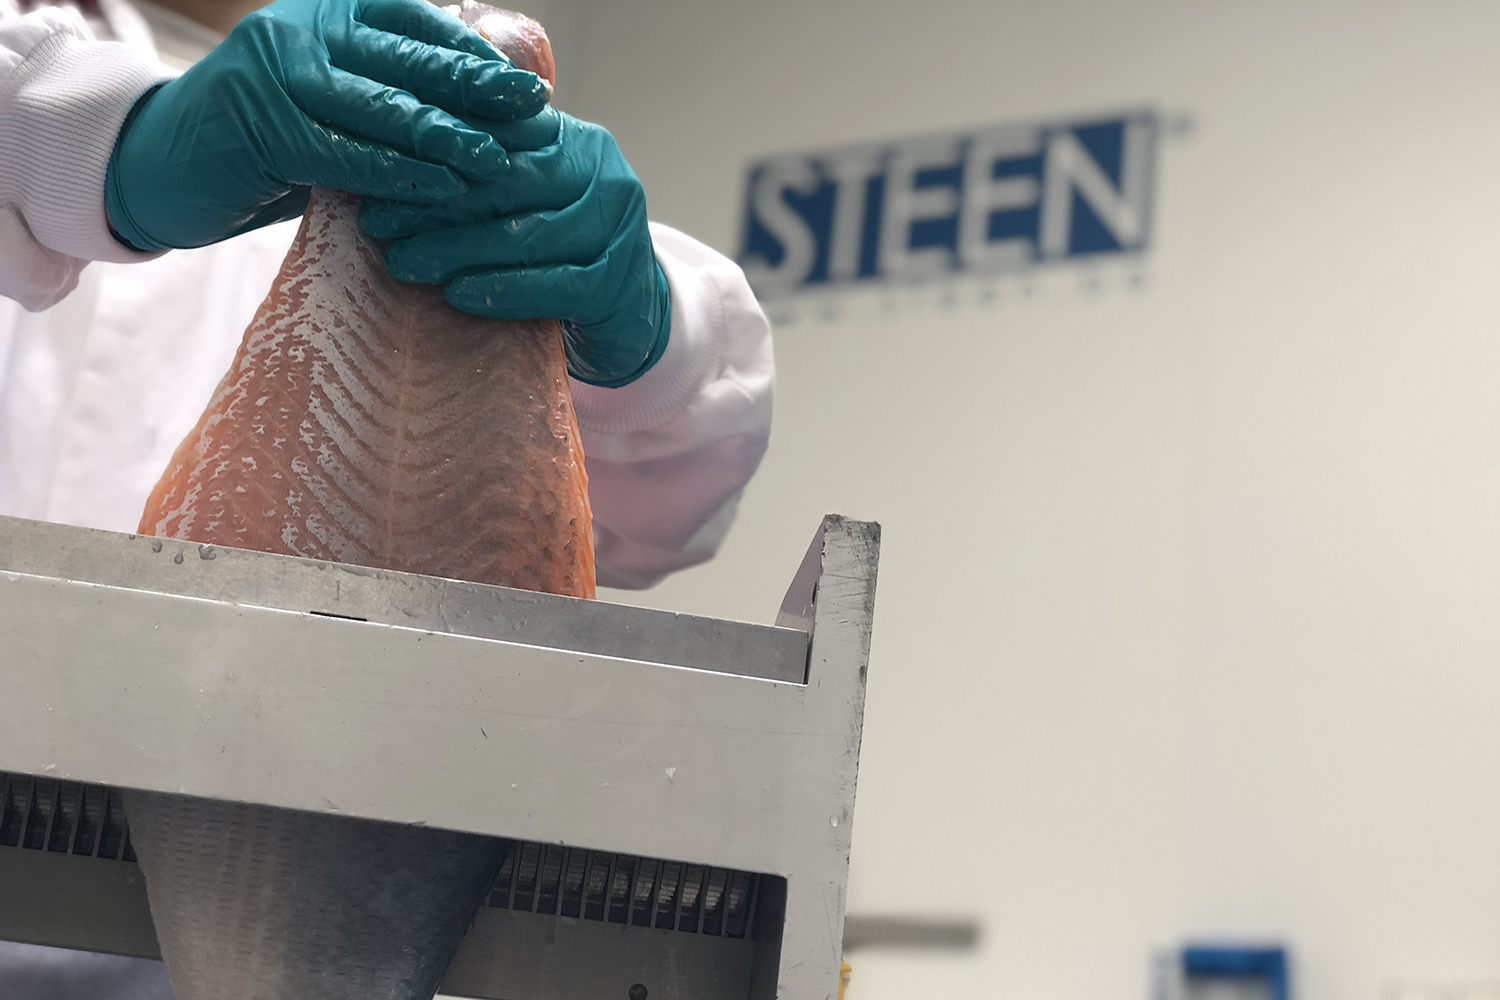 There's only one way to skin a fish: A STEEN machine - Responsible